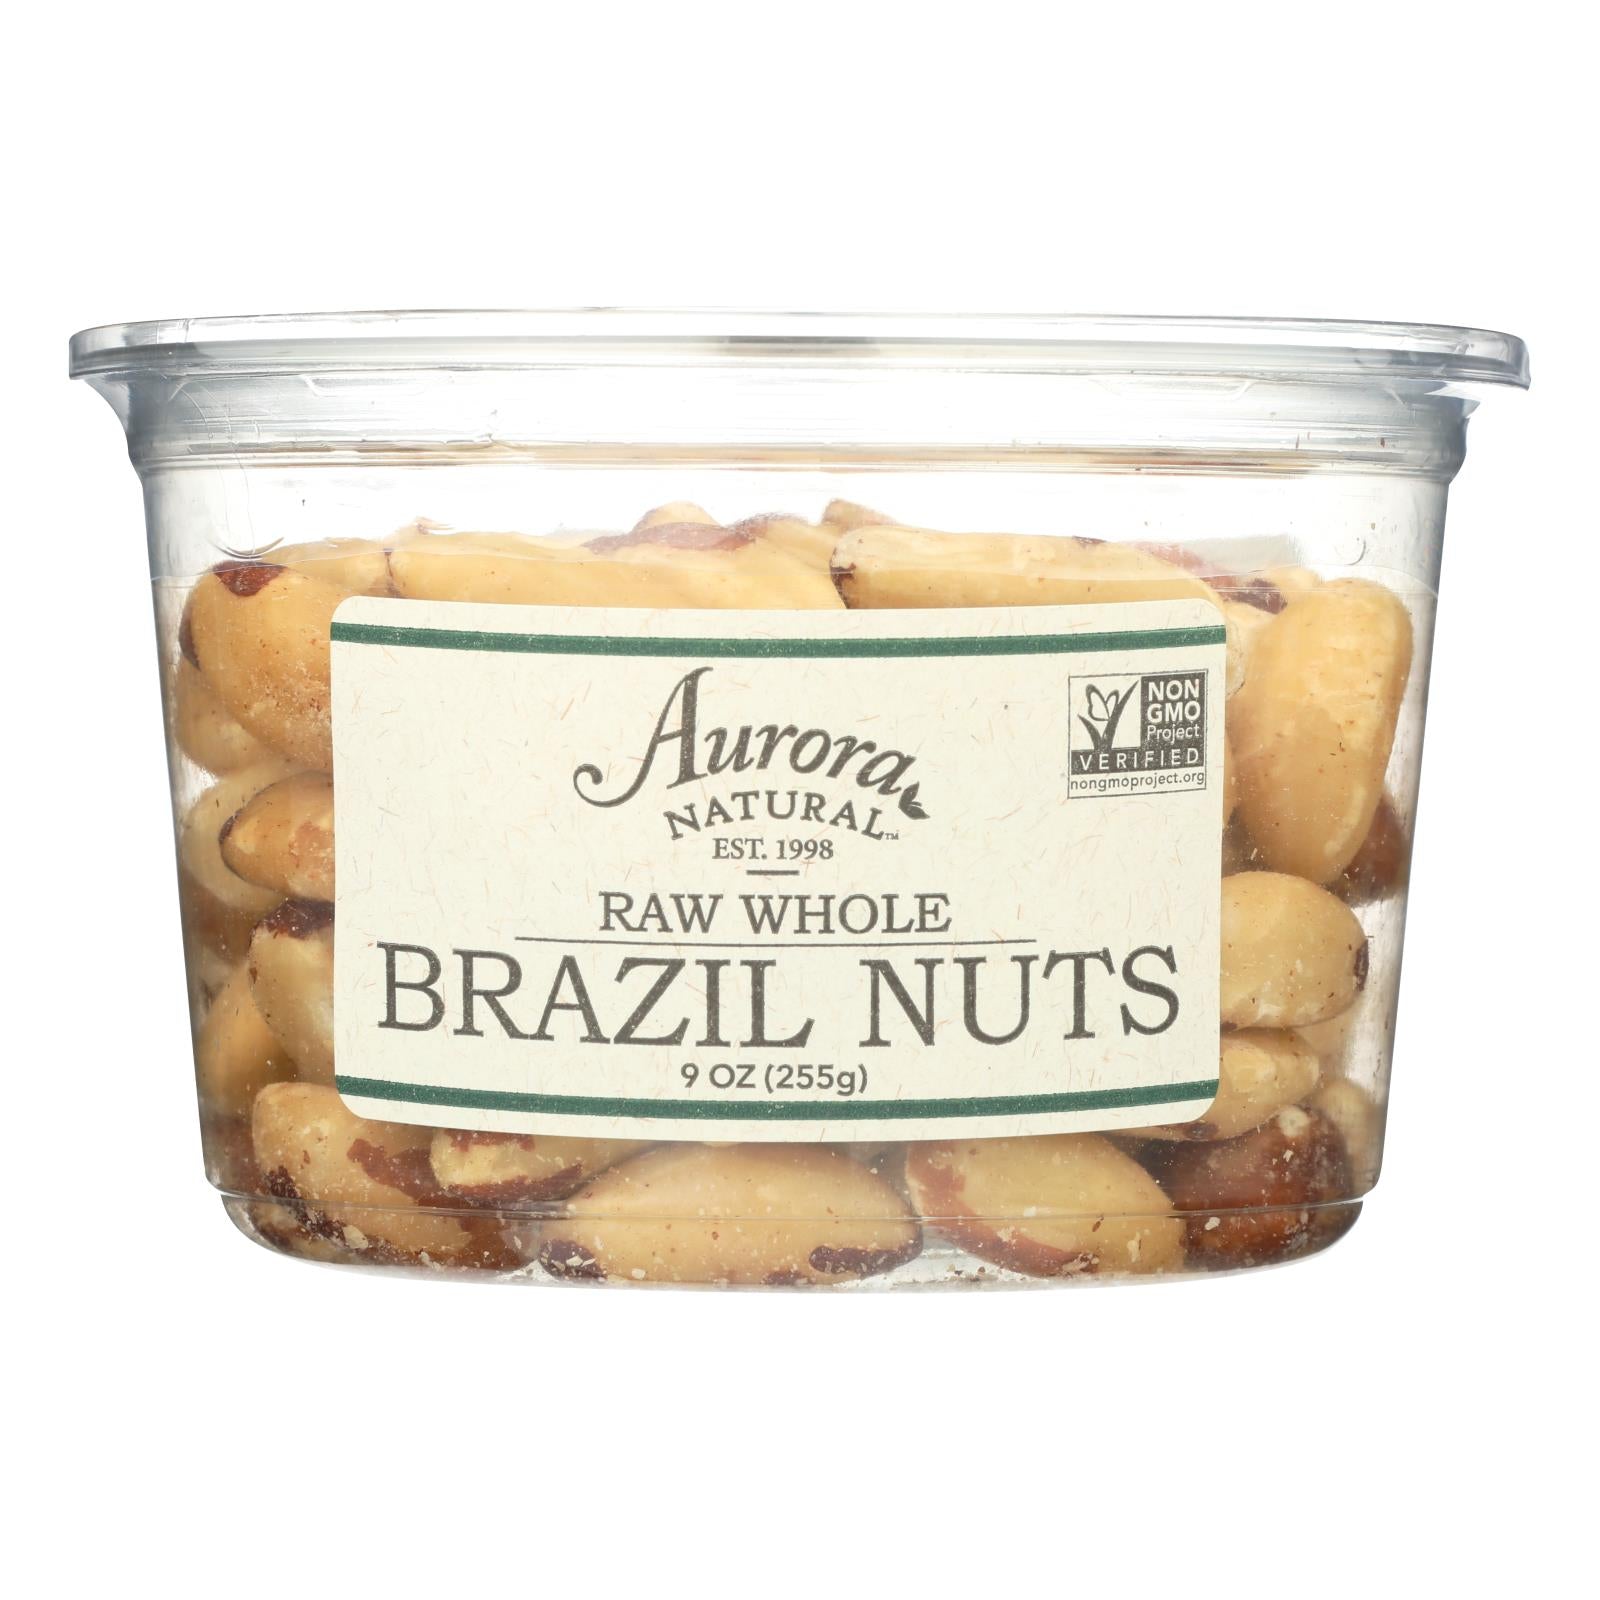 Aurora Natural Products, Aurora Natural Products - Raw Whole Brazil Nuts - Case of 12 - 9 oz. (Pack of 12)